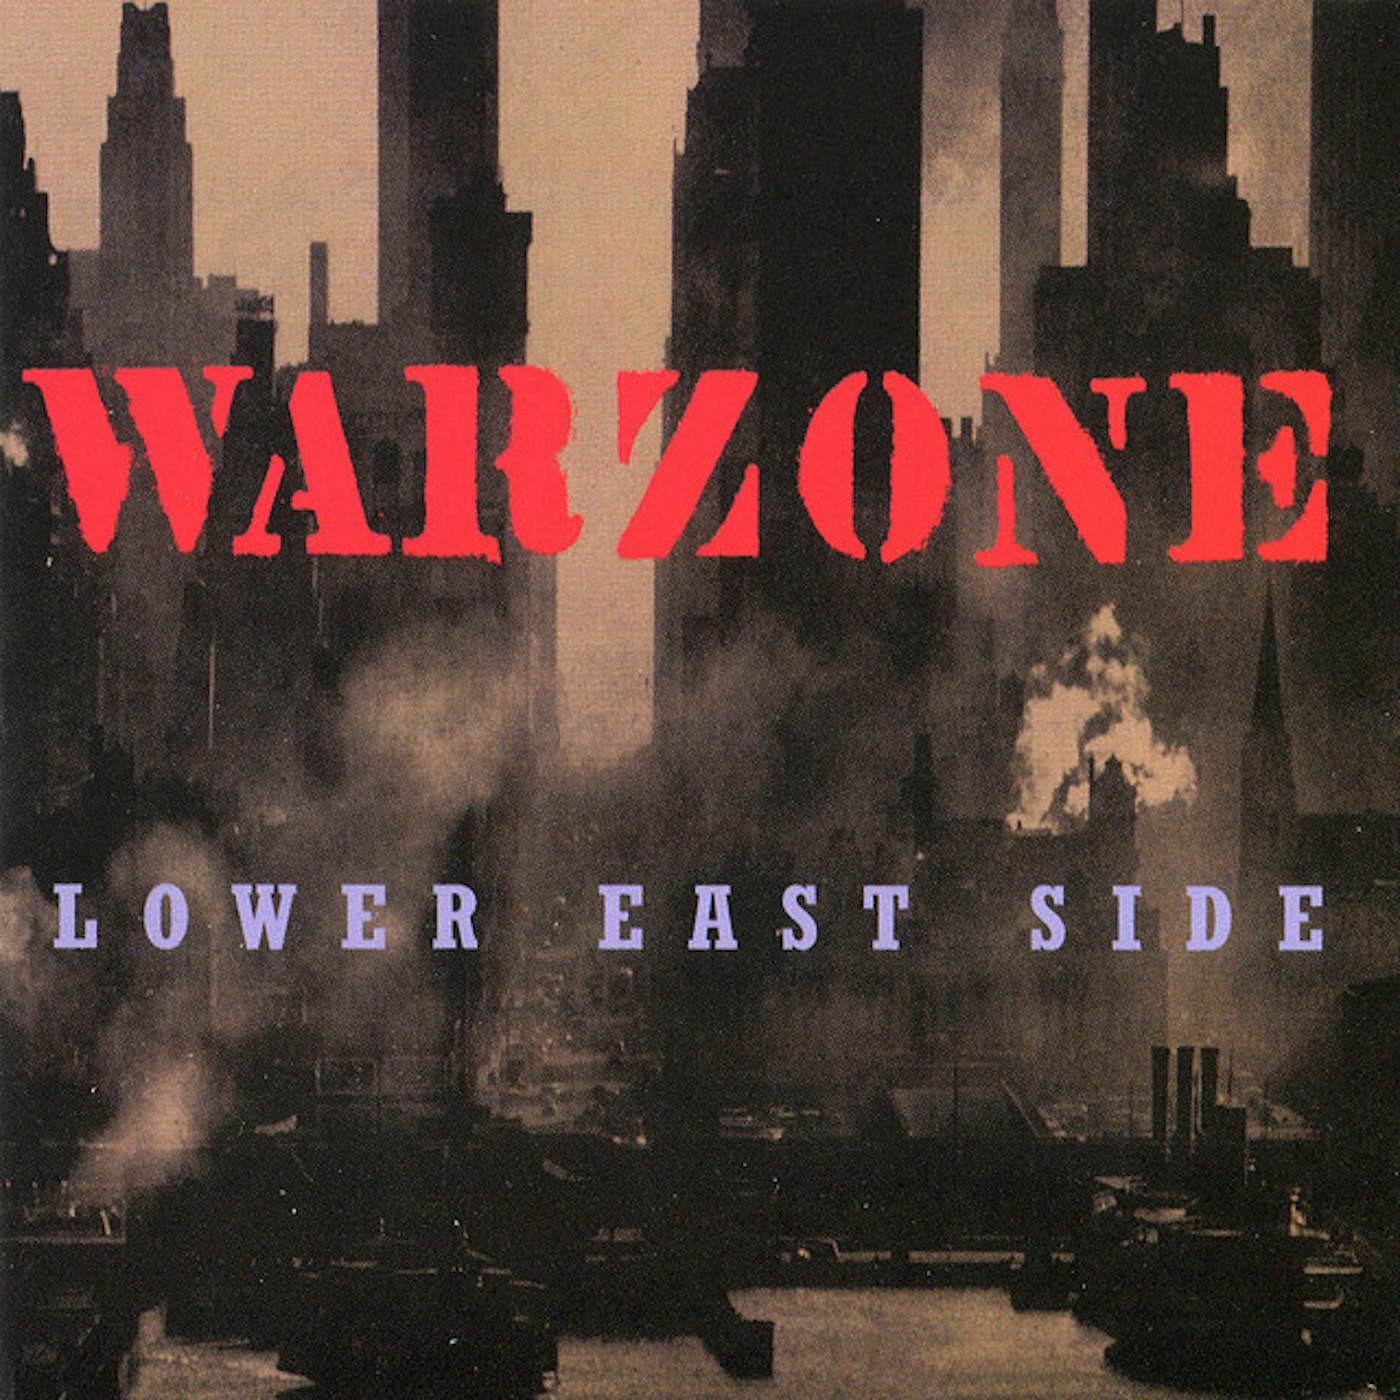 Warzone Lower East Side Vinyl Record